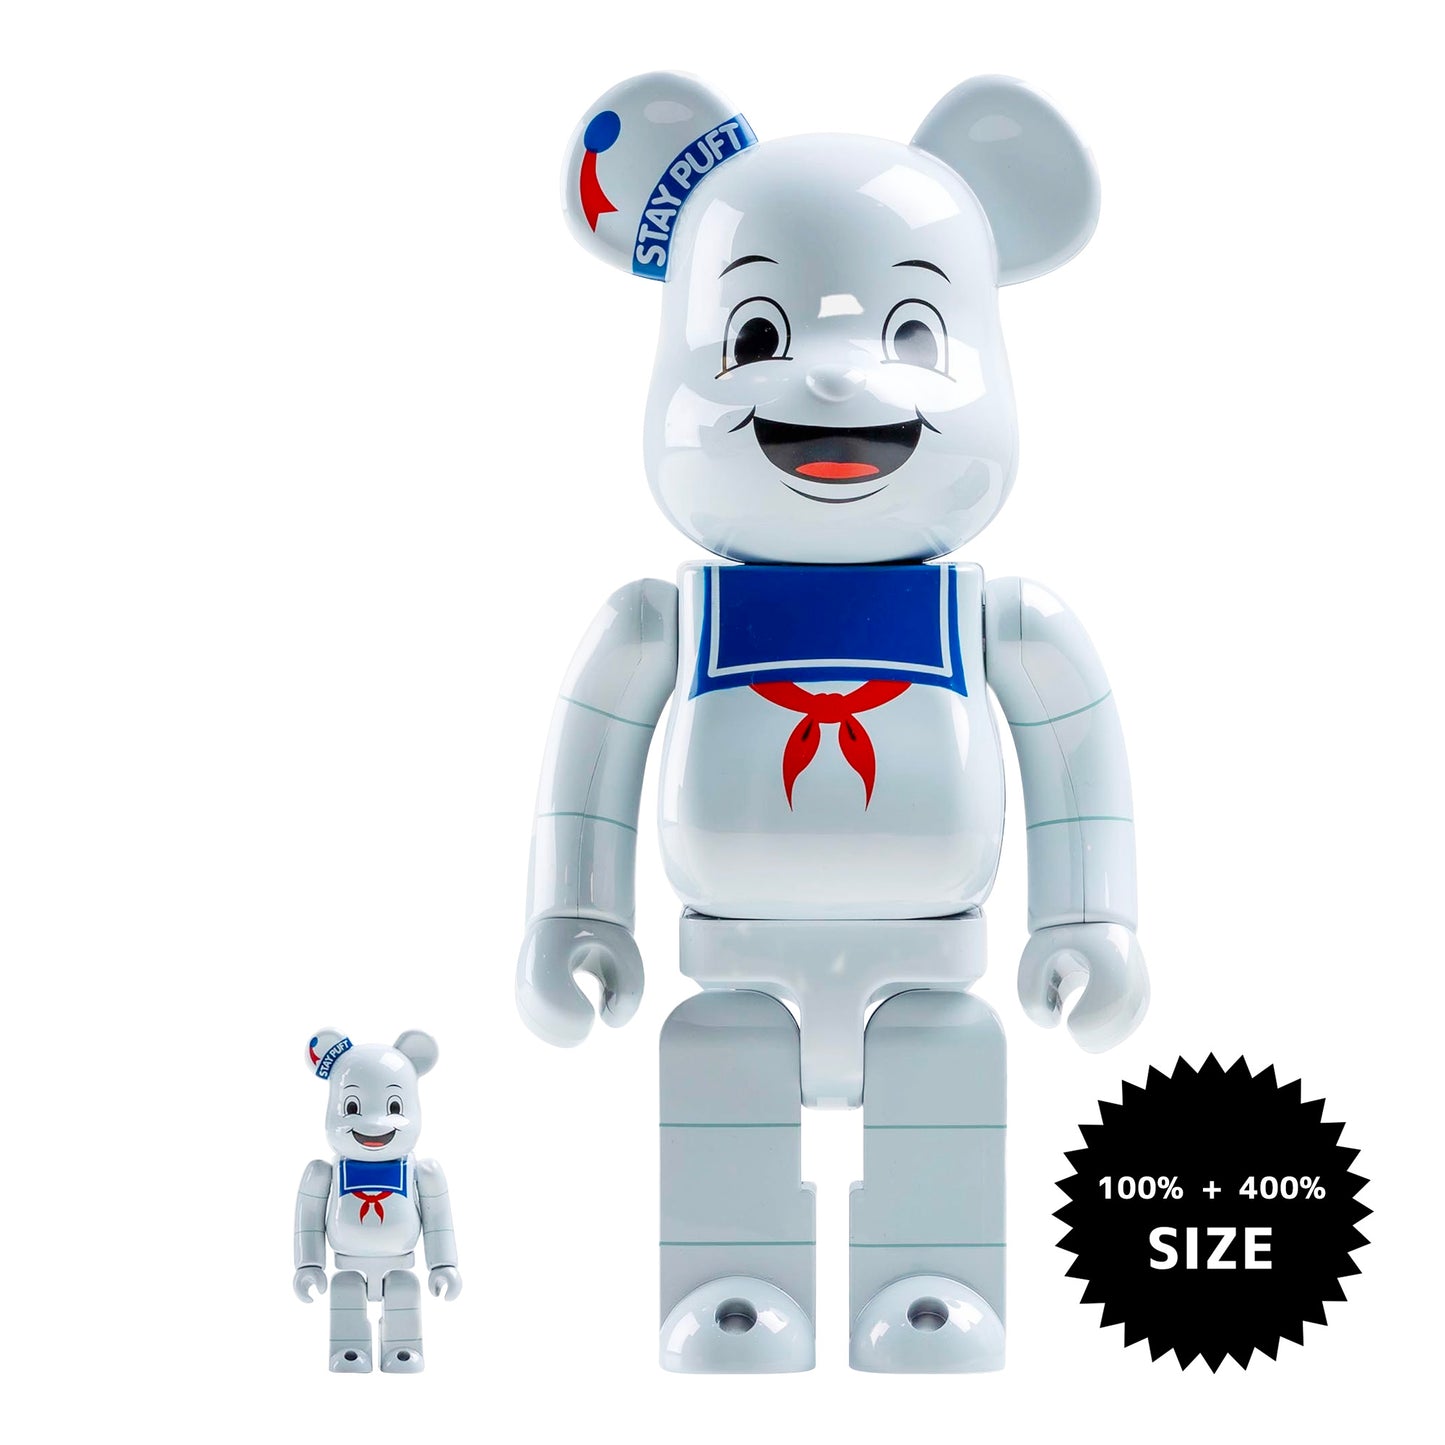 MEDICOM TOY: BE@RBRICK - Ghostbusters Stay Puft Marshmallow Man White Chrome 100% & 400%